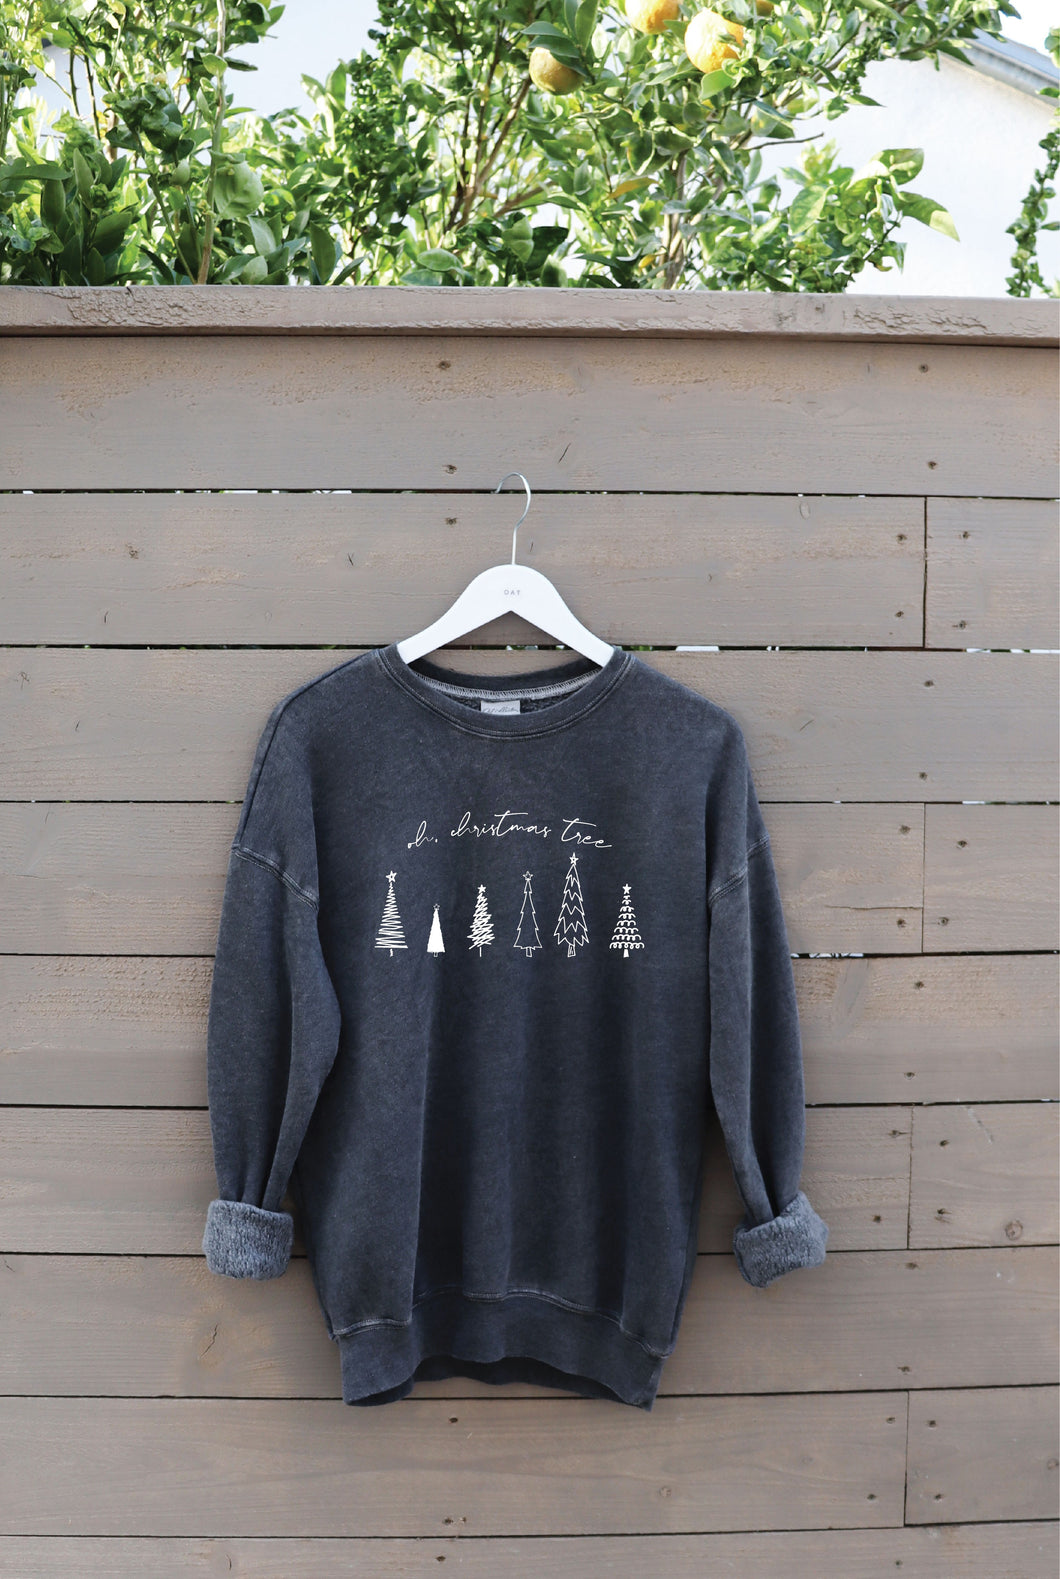 Vintage Black Oh Christmas Tree Mineral Oat Collective Sweatshirt 9/26/23 7121